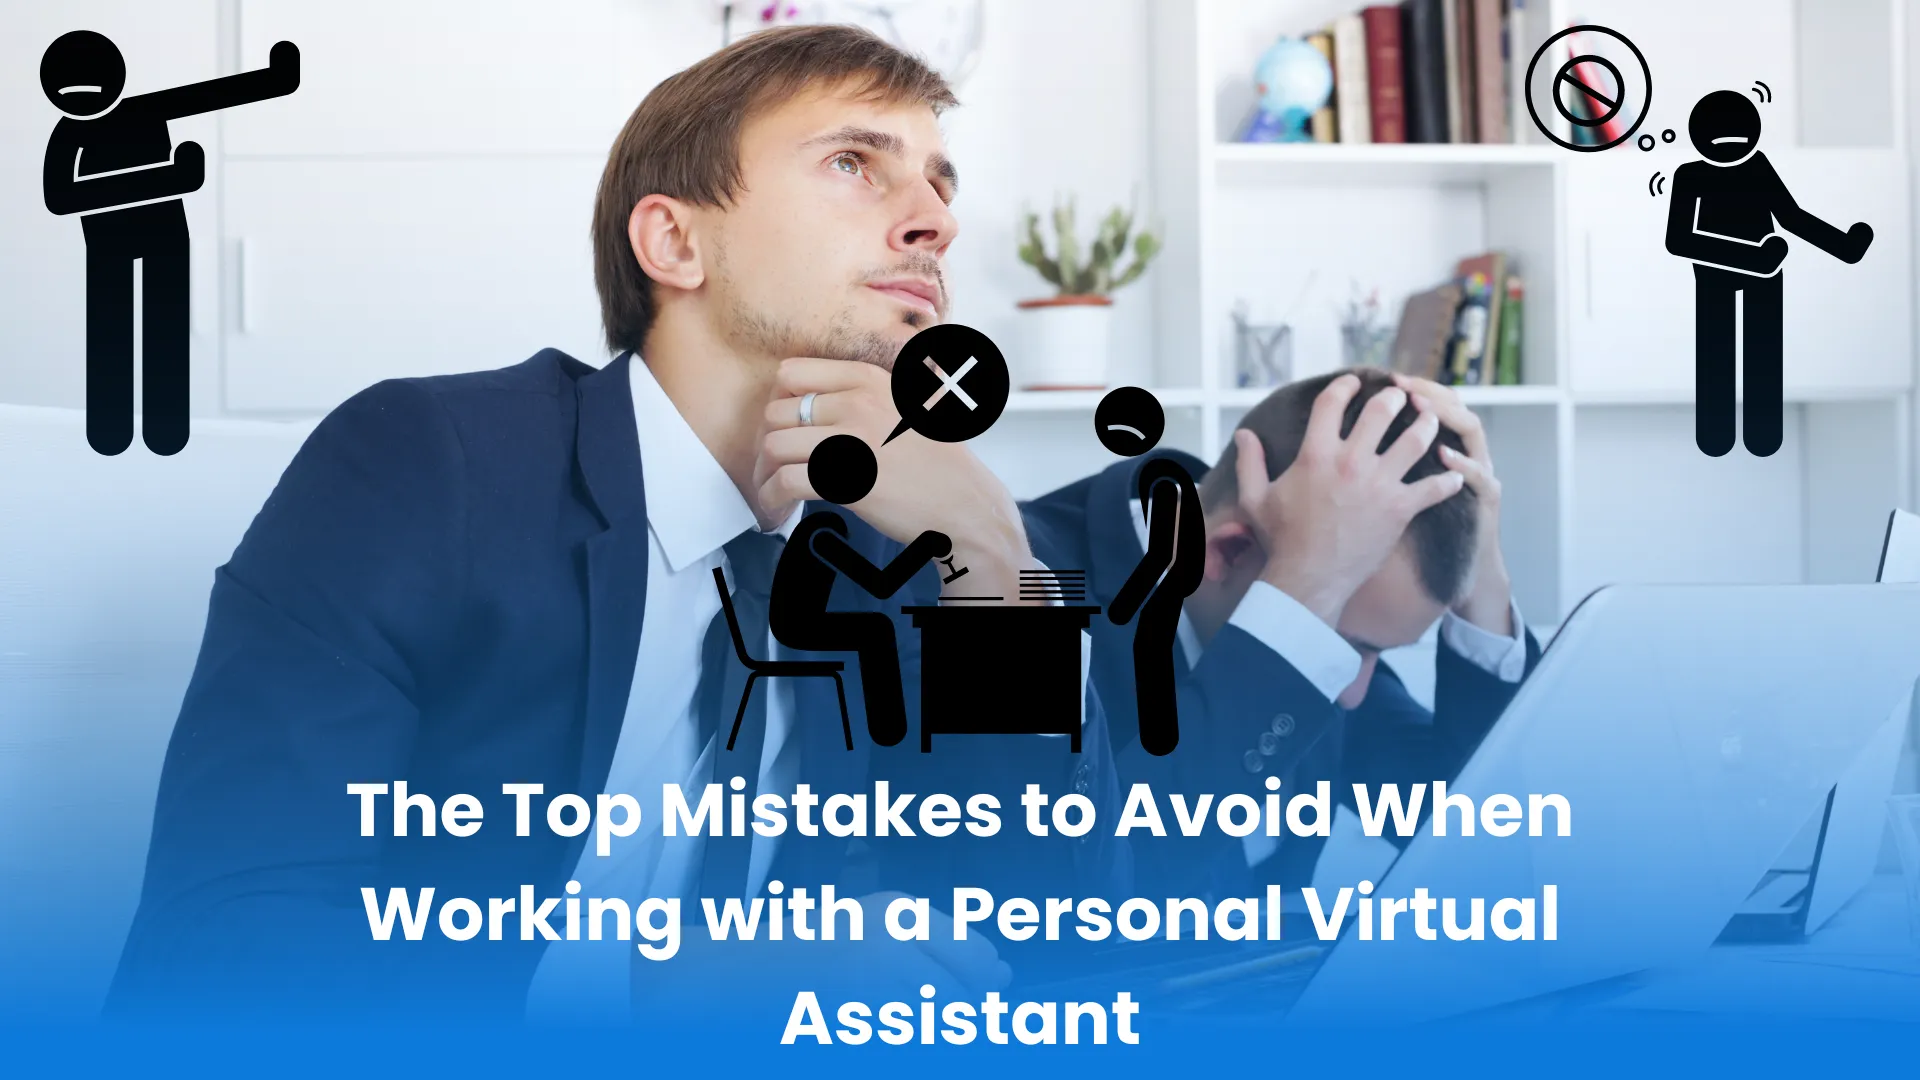 The Top Mistakes to Avoid When Working with a Personal Virtual Assistant